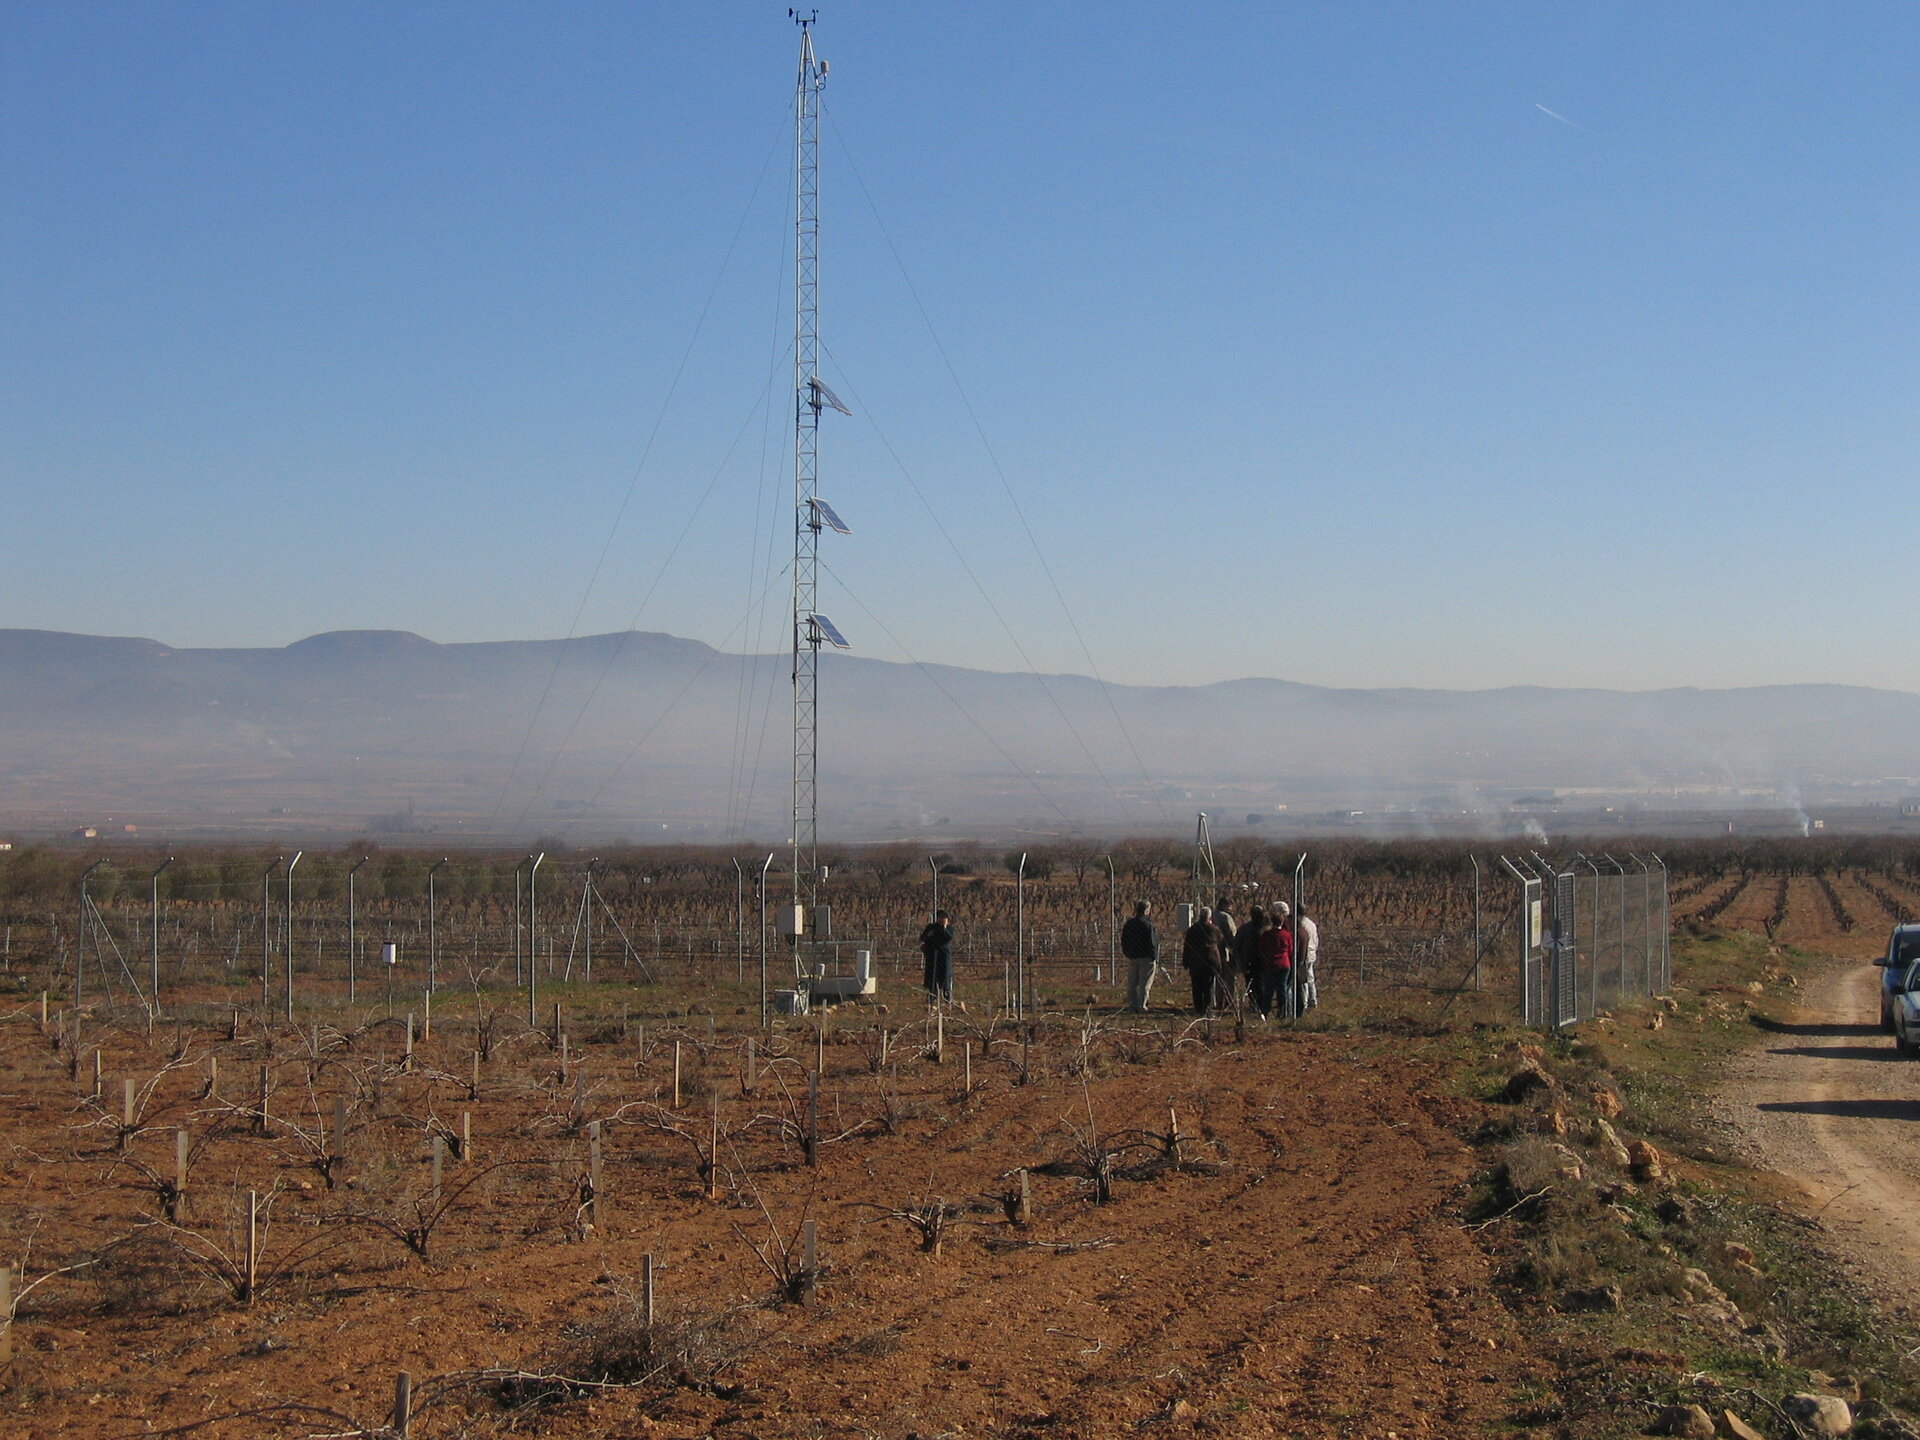 Meteorological data acquisition station in the vineyards